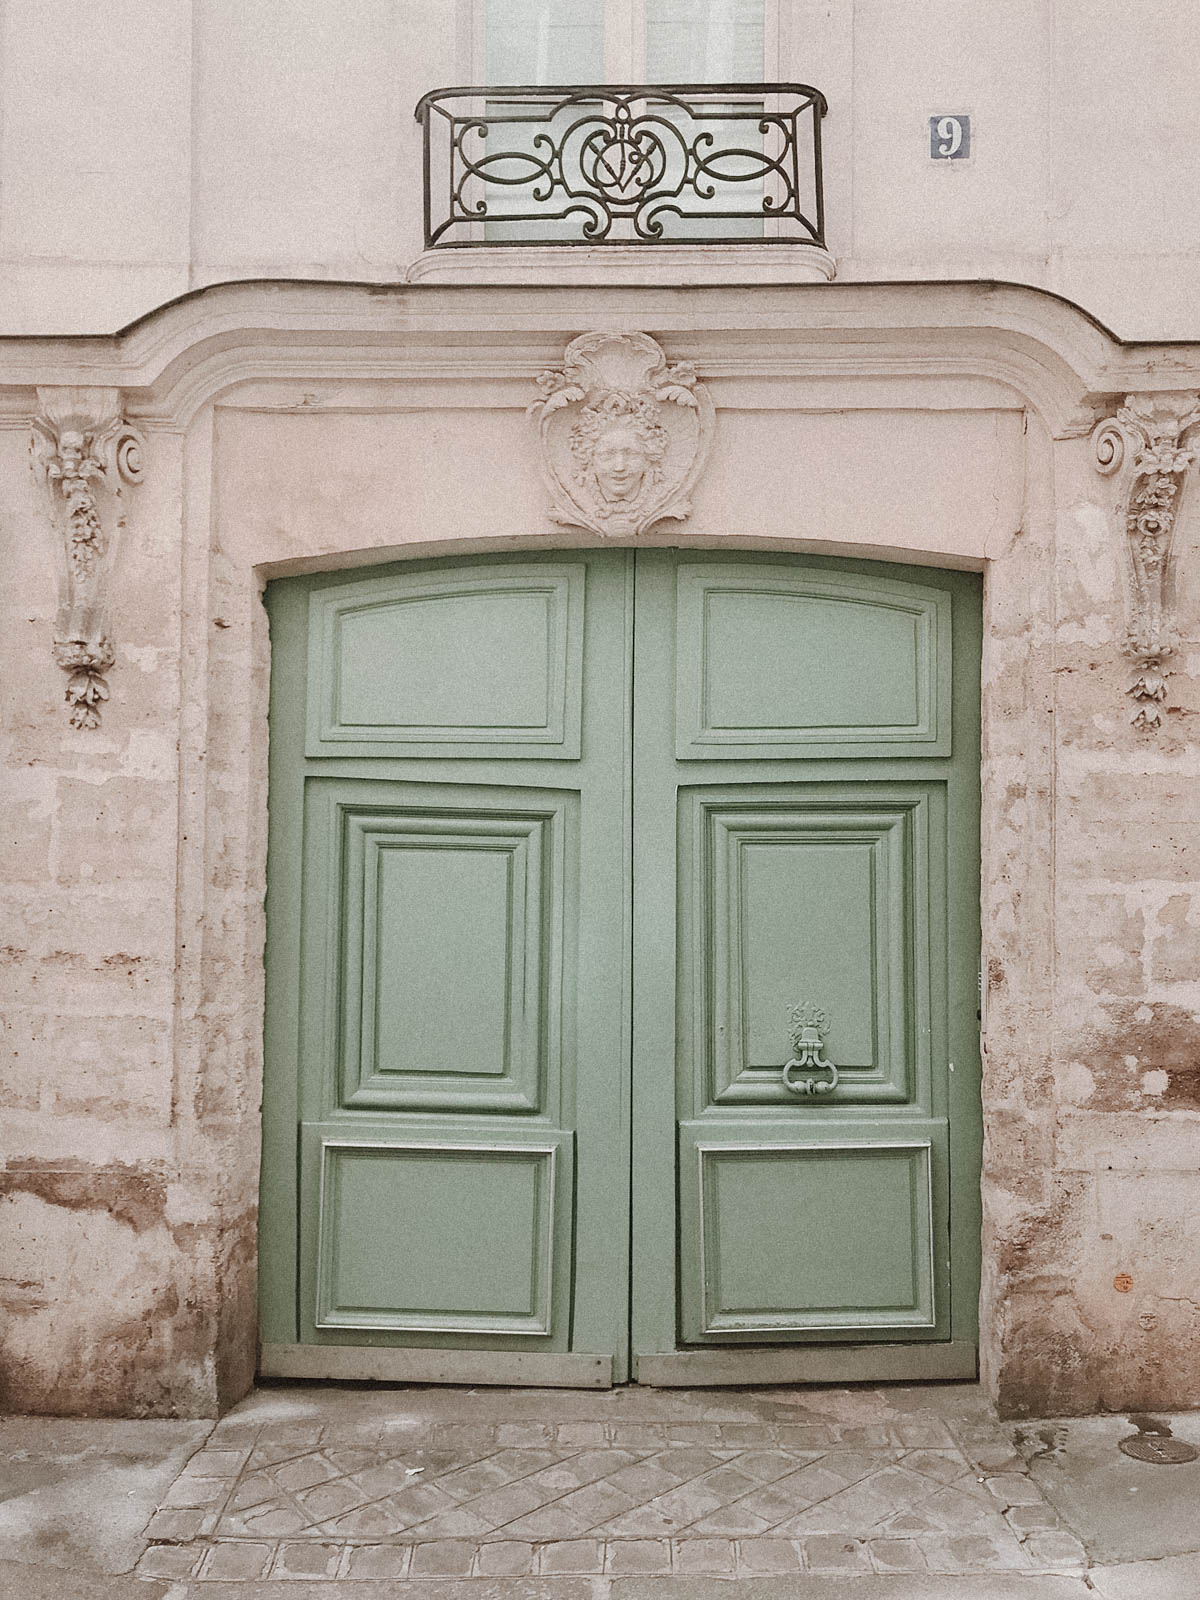 Paris France Travel Guide - Beautiful Green Door, European Architecture and Buildings / RG Daily Blog